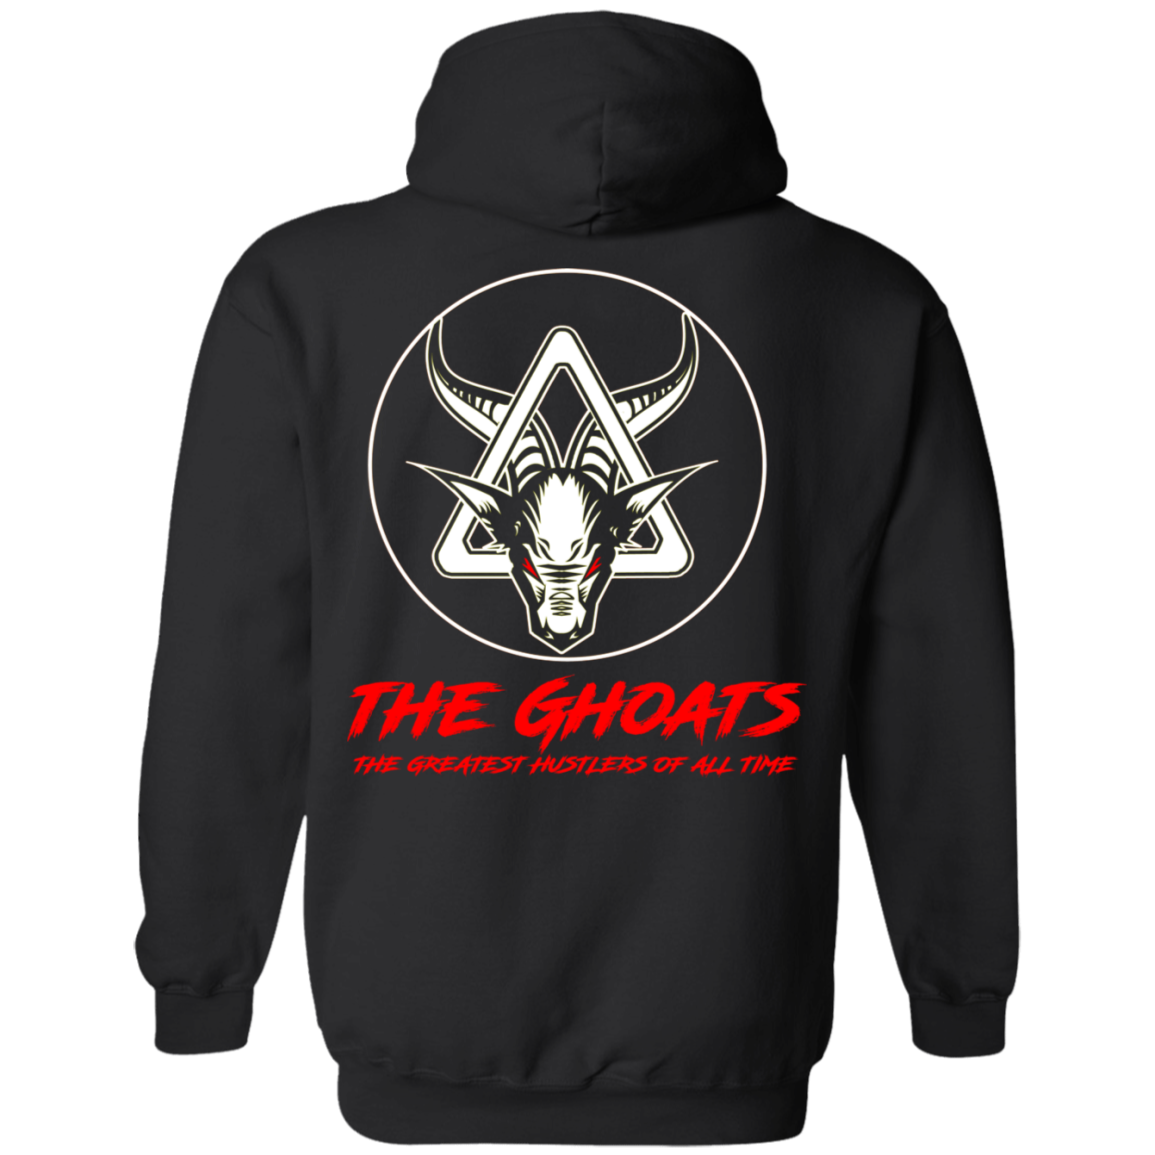 The GHOATS Custom Design #5. The Best Offense is a Good Defense. Basic Pullover Hoodie